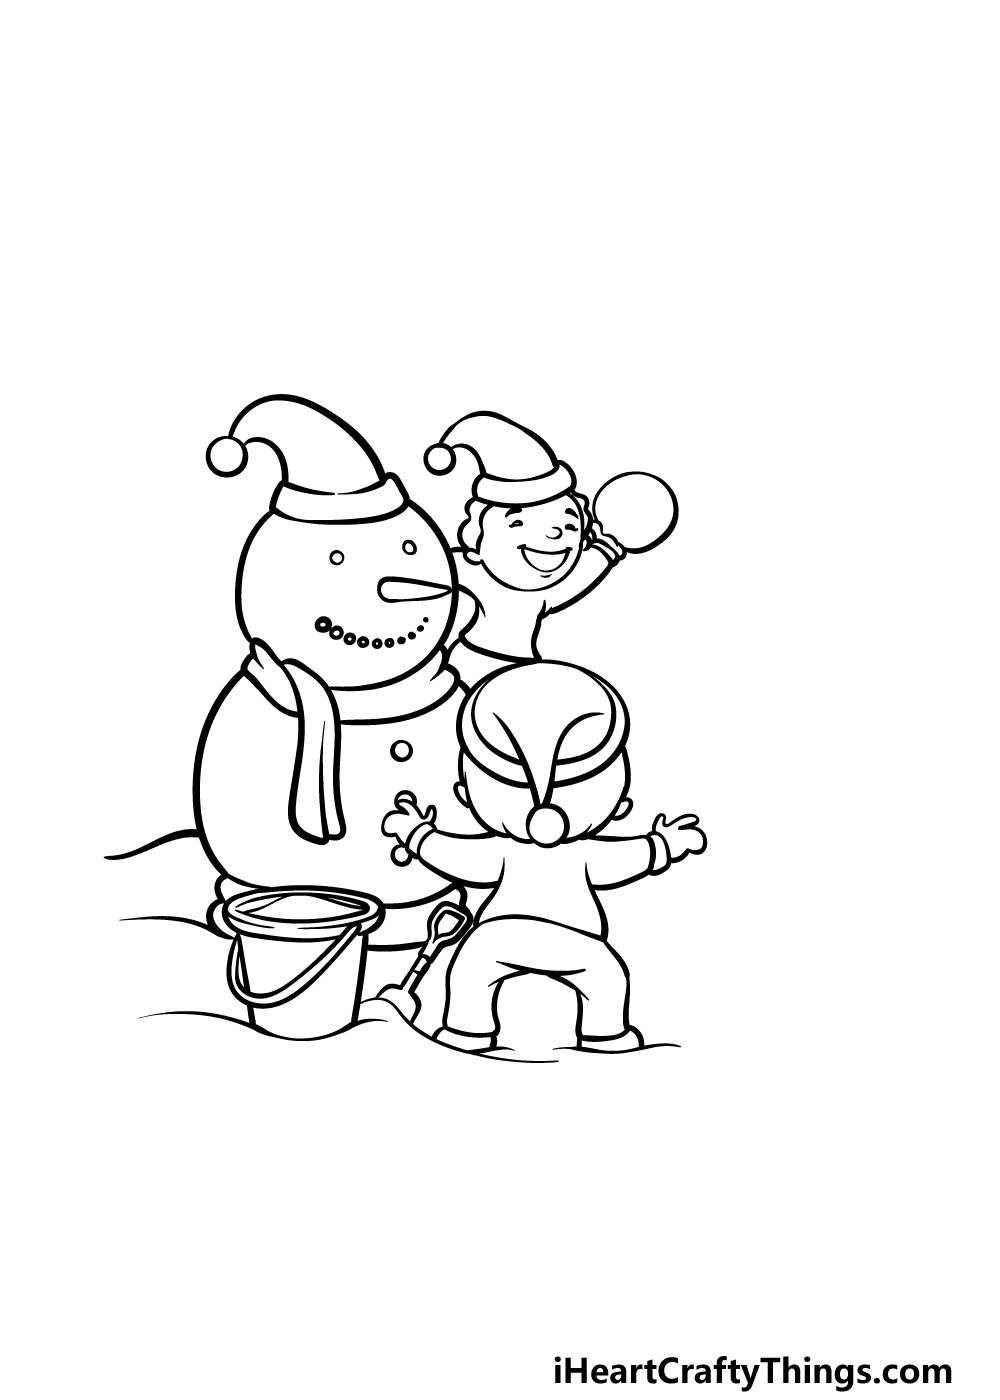 how to draw a Holiday step 4